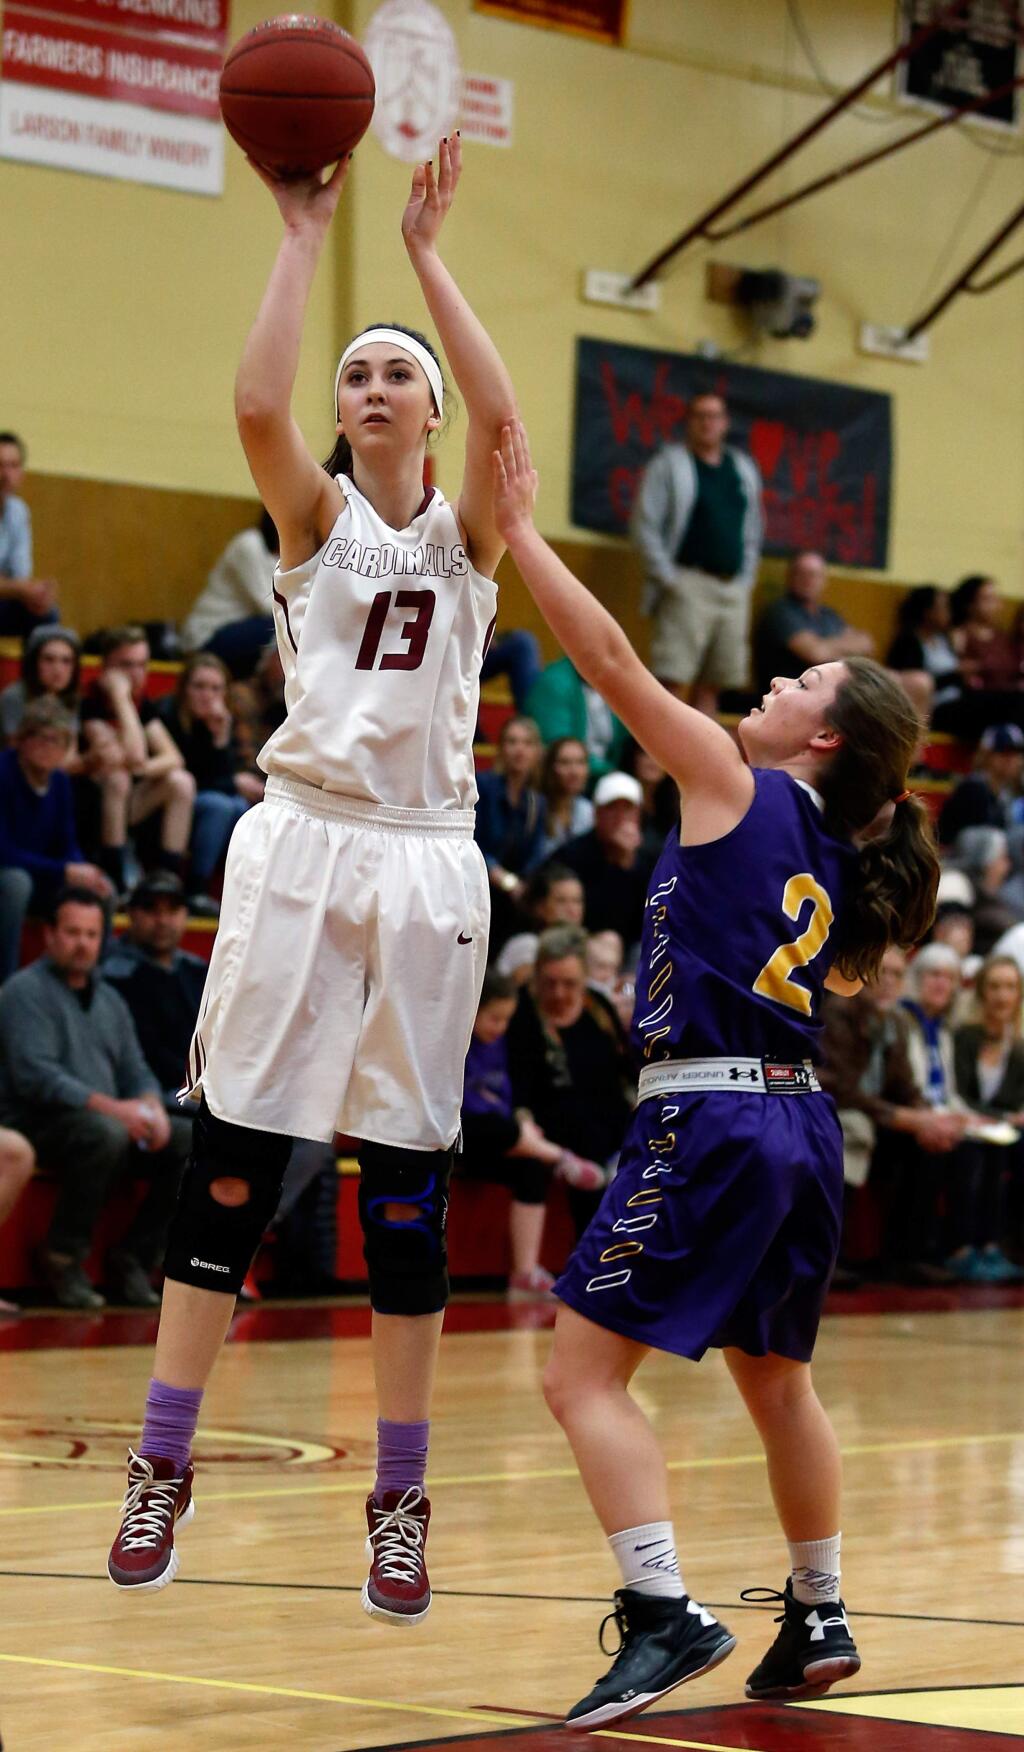 Cardinal Newman's Hailey Vice-Neat (13) shoots a jump shot while Middletown's Kaleigh Alves (2) defends during the first half of a NCS Division 4 girls basketball quarterfinal game on Saturday, Feb. 27, 2016. (Alvin Jornada / The Press Democrat)